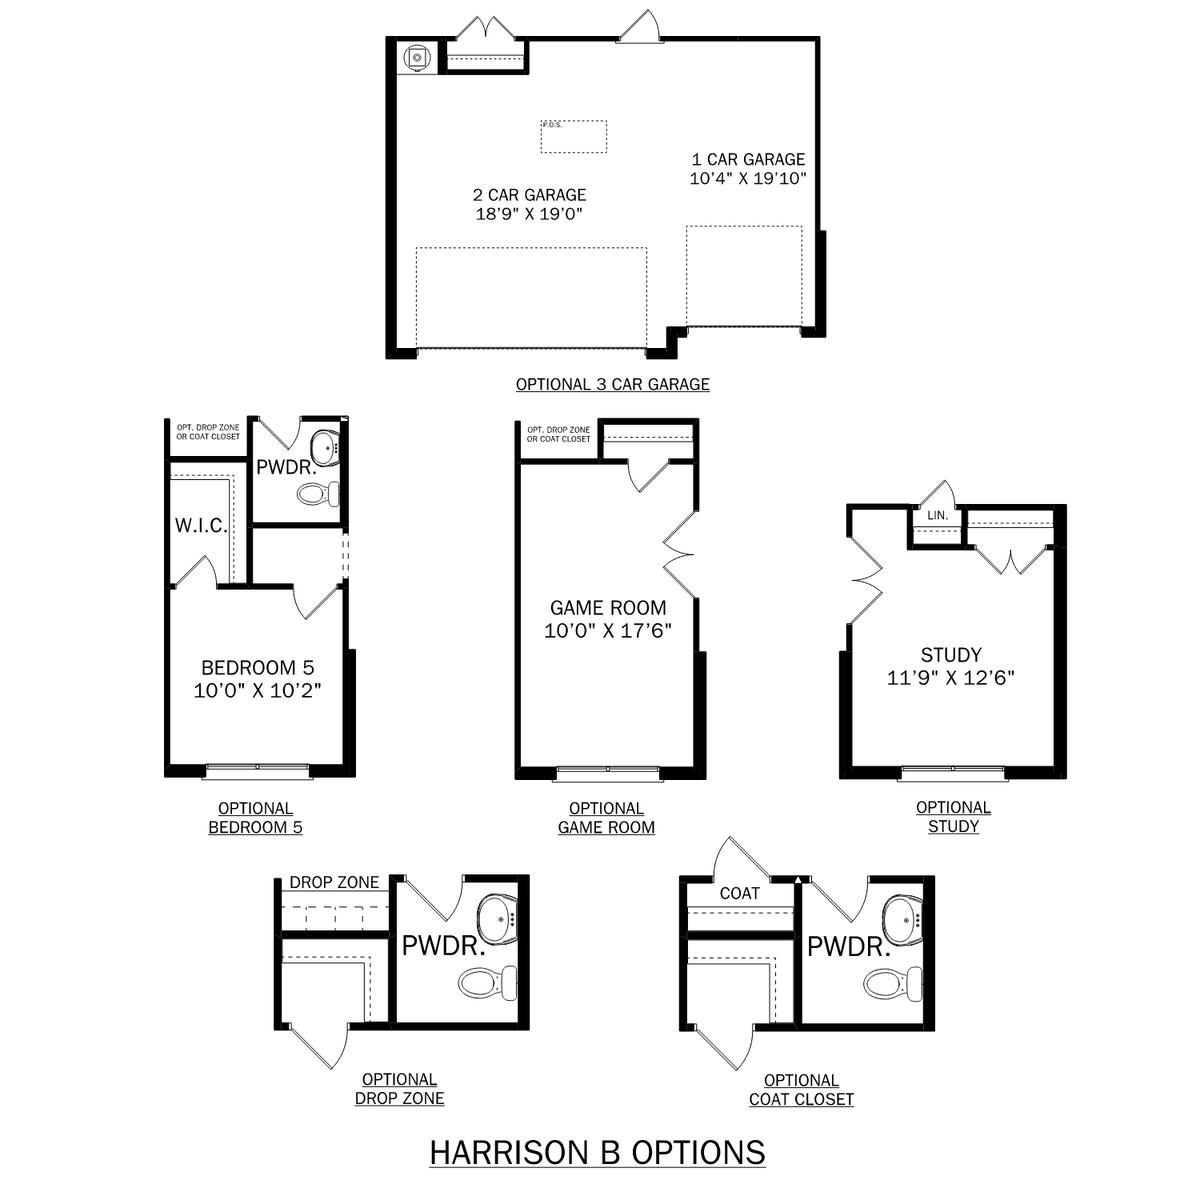 2 - The Harrison B buildable floor plan layout in Davidson Homes' Creekside community.